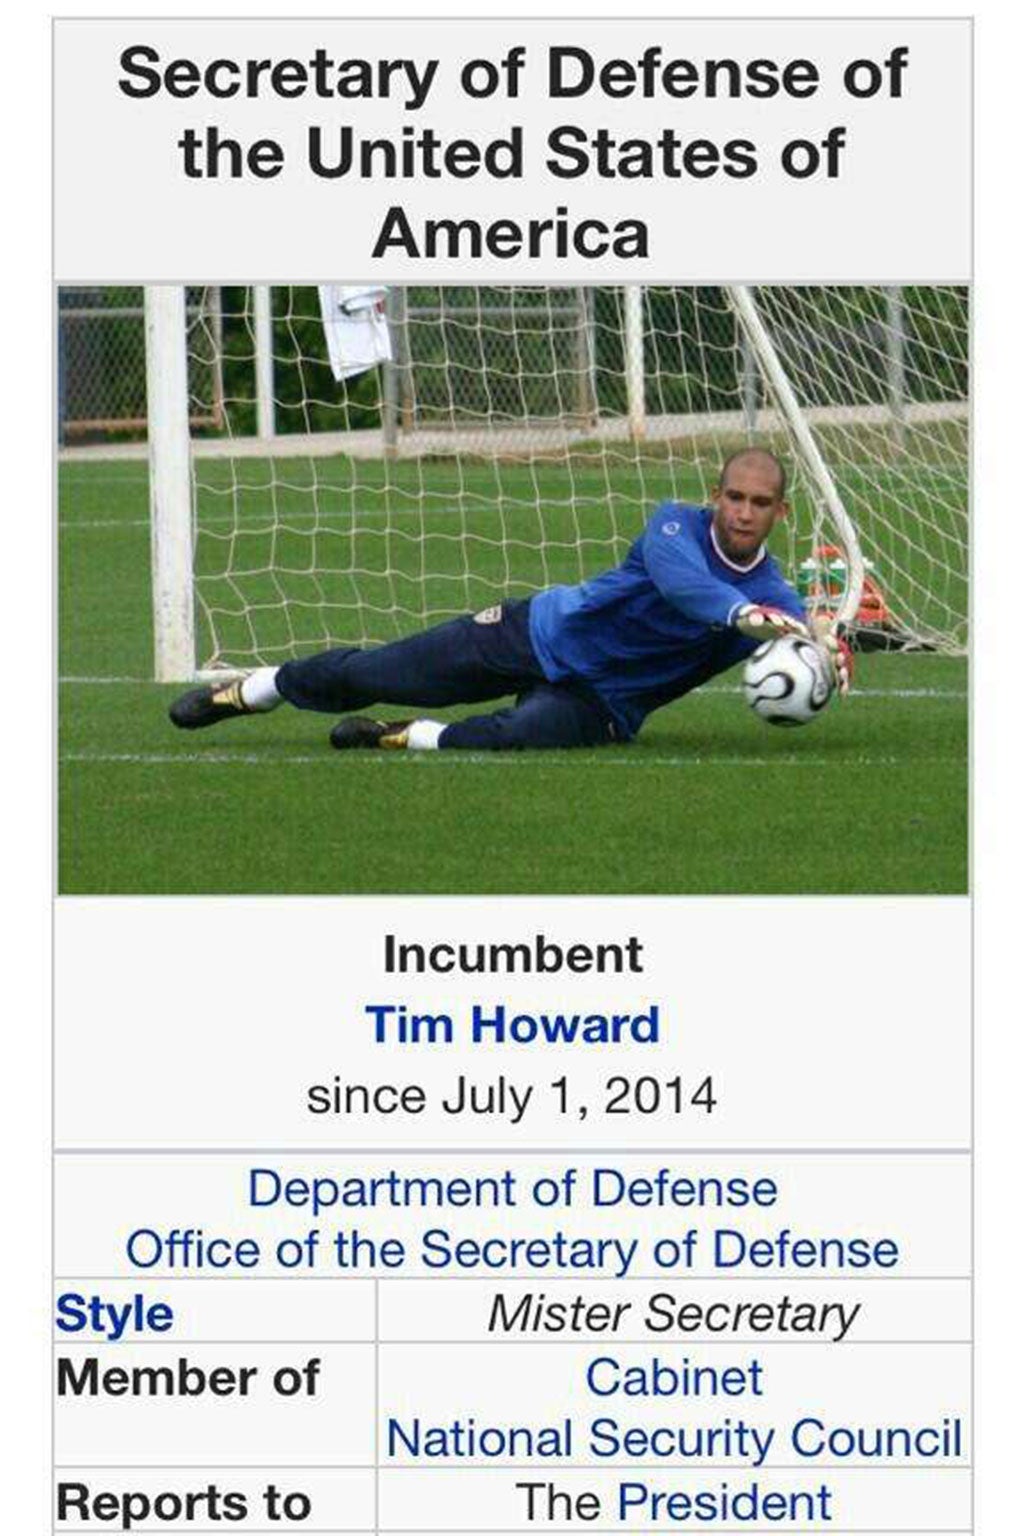 Tim Howard's Wikipedia page was changed to claim he was the new Secretary of Defence of the USA